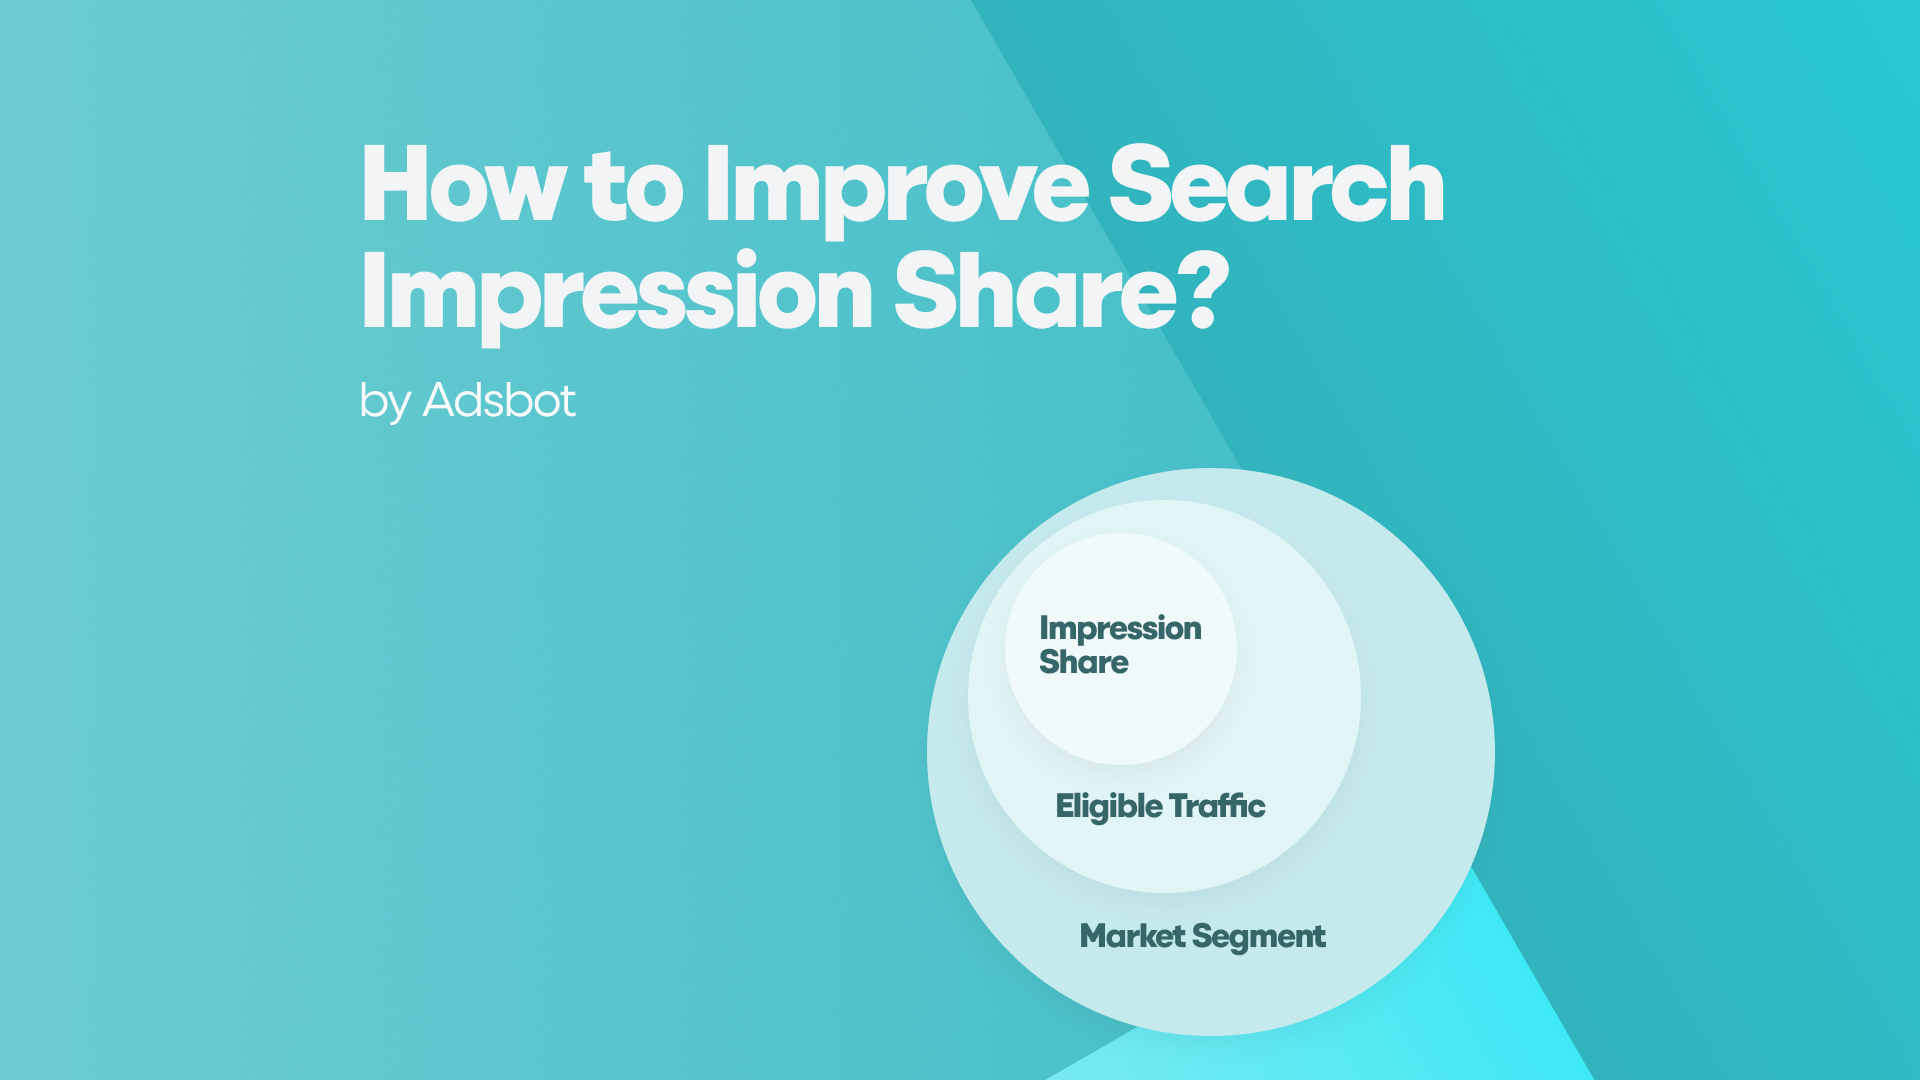 How to Improve Search Impression Share?